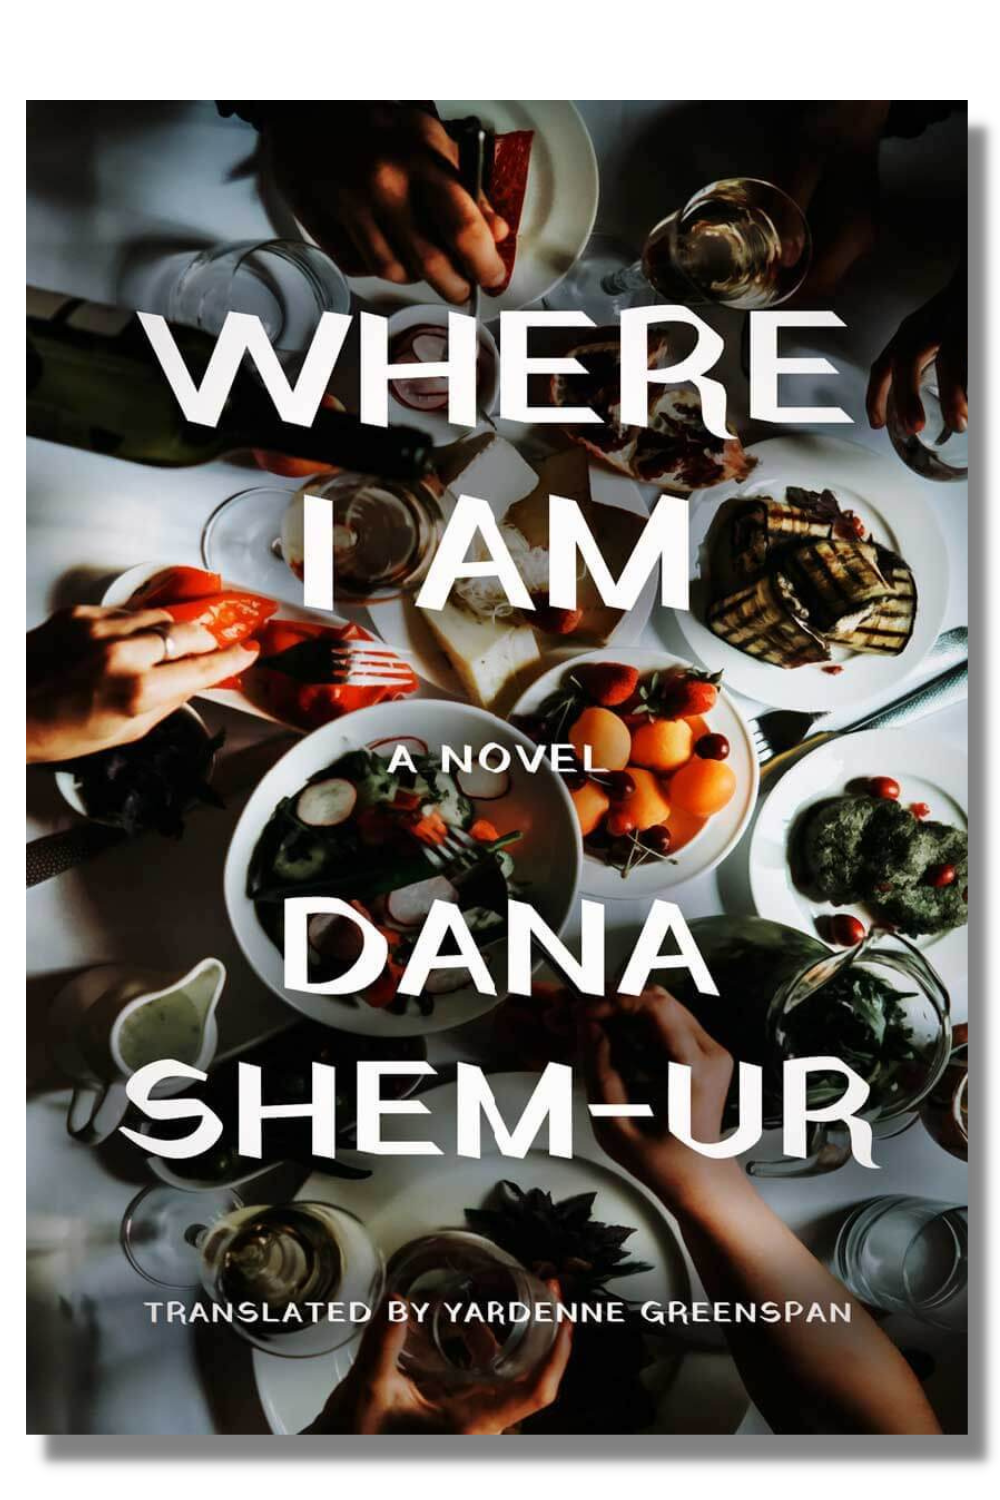 The cover of "Where I Am"